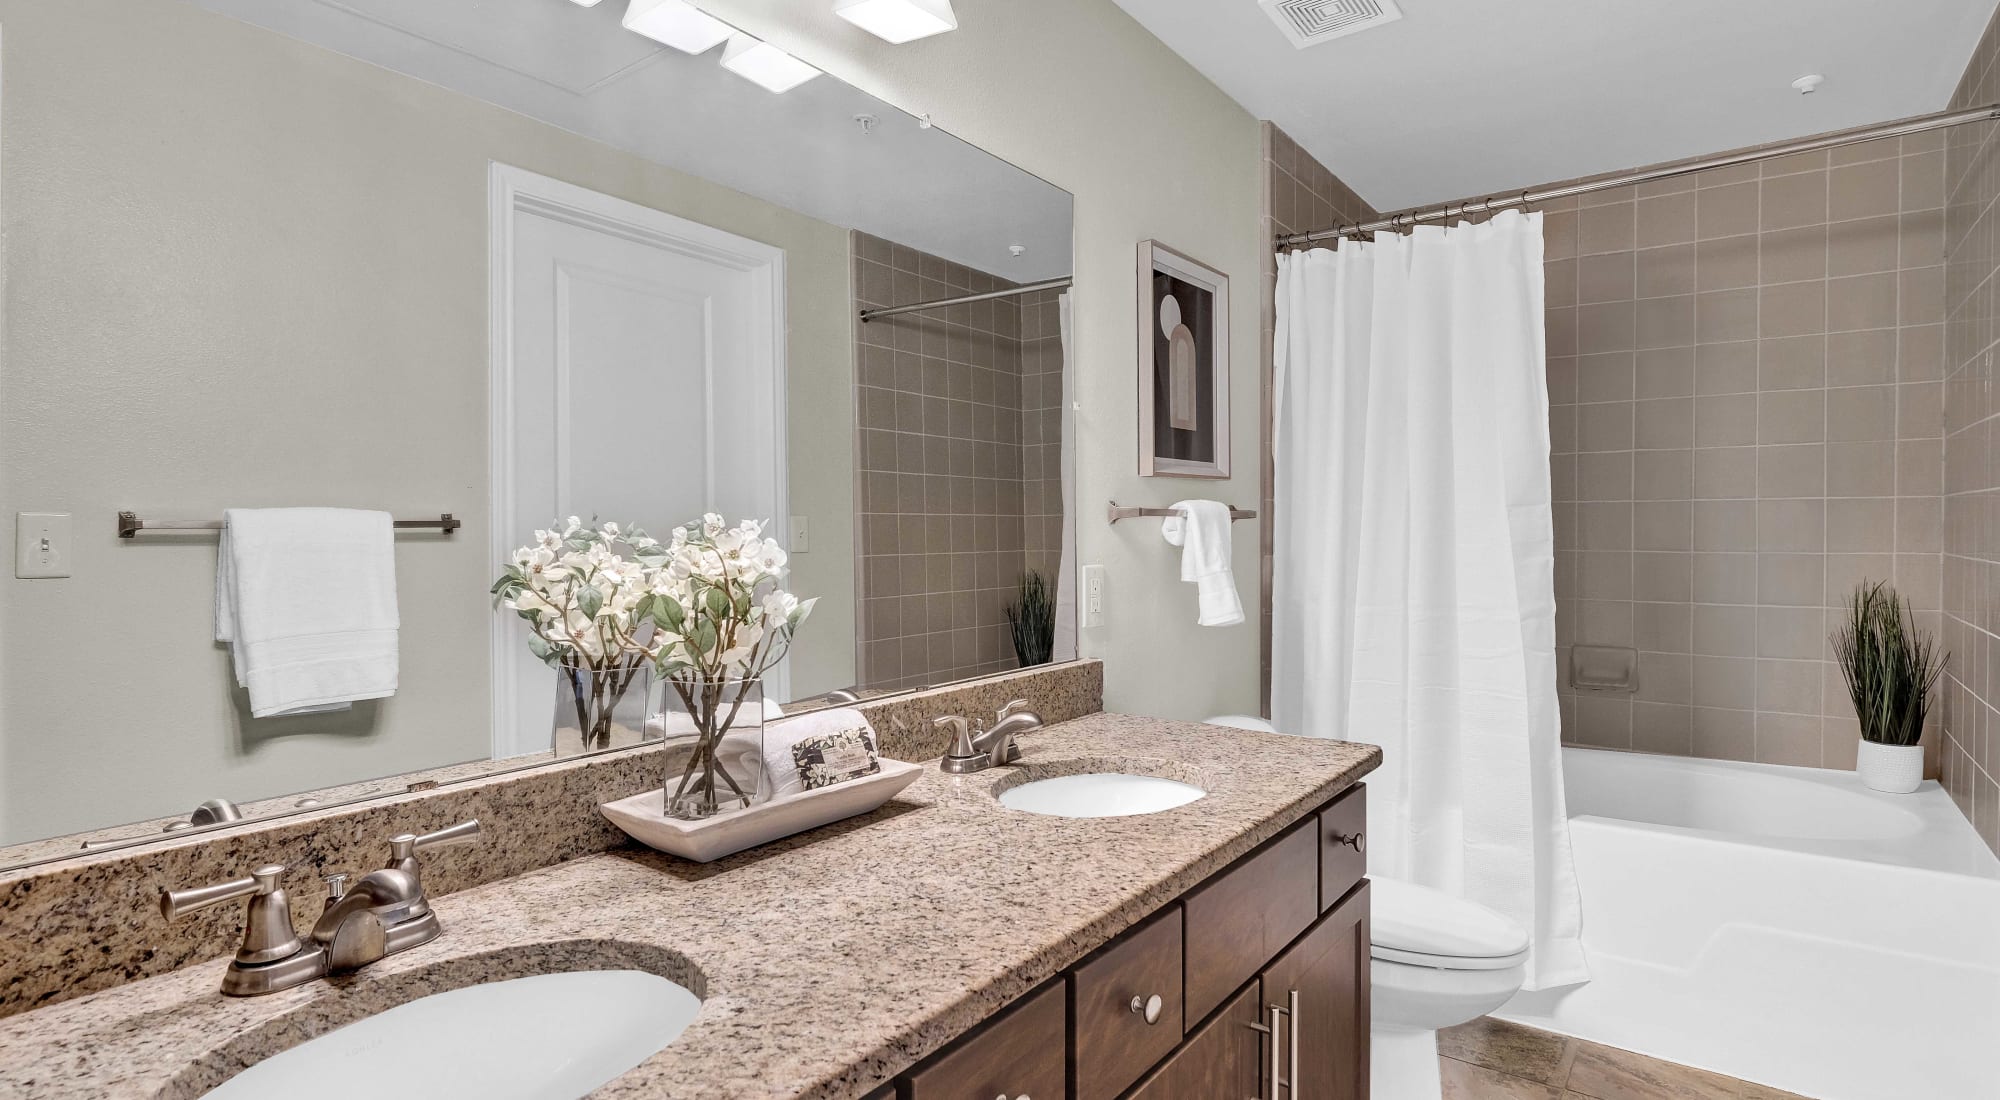 Bathroom with double vanity at The Lodge at Westover Hills in San Antonio, Texas